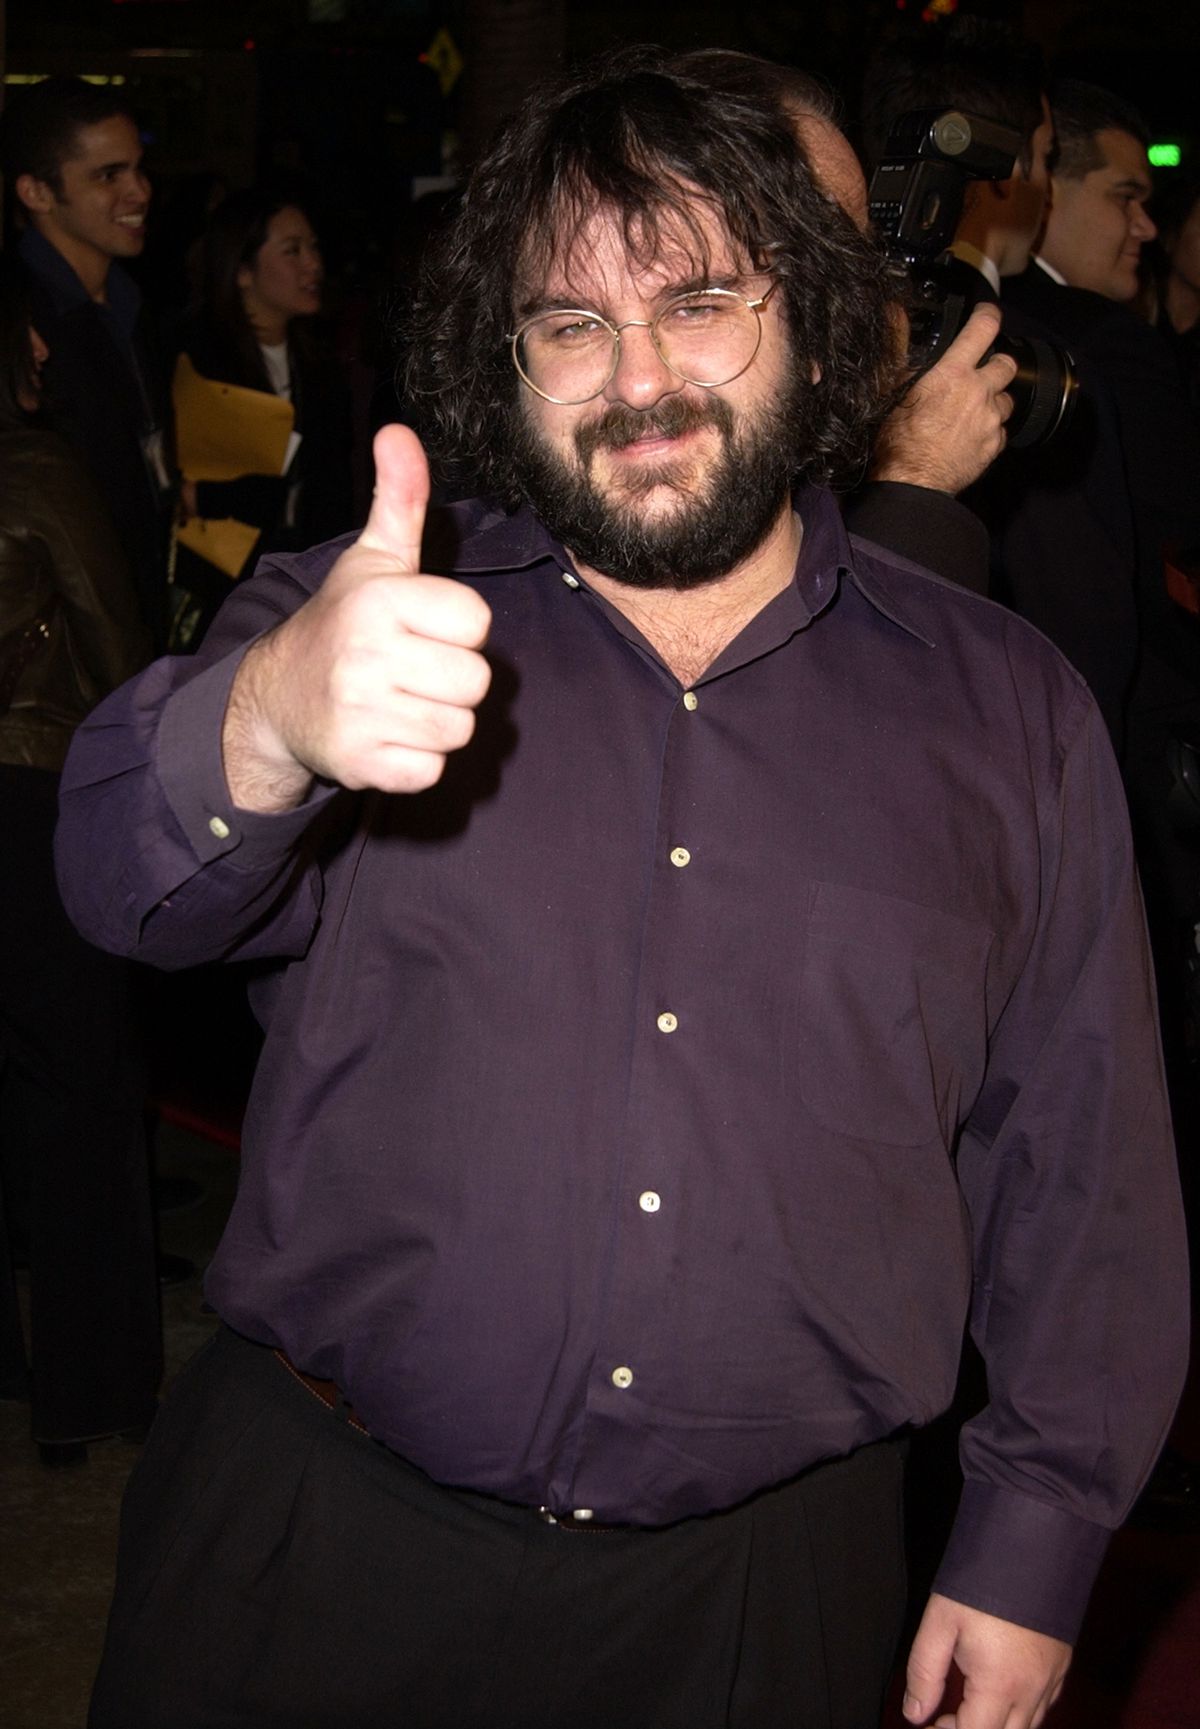 Peter Jackson gives a thumbs-up on the red carpet at the Los Angeles premiere of The Lord of the Rings: The Fellowship of the Ring